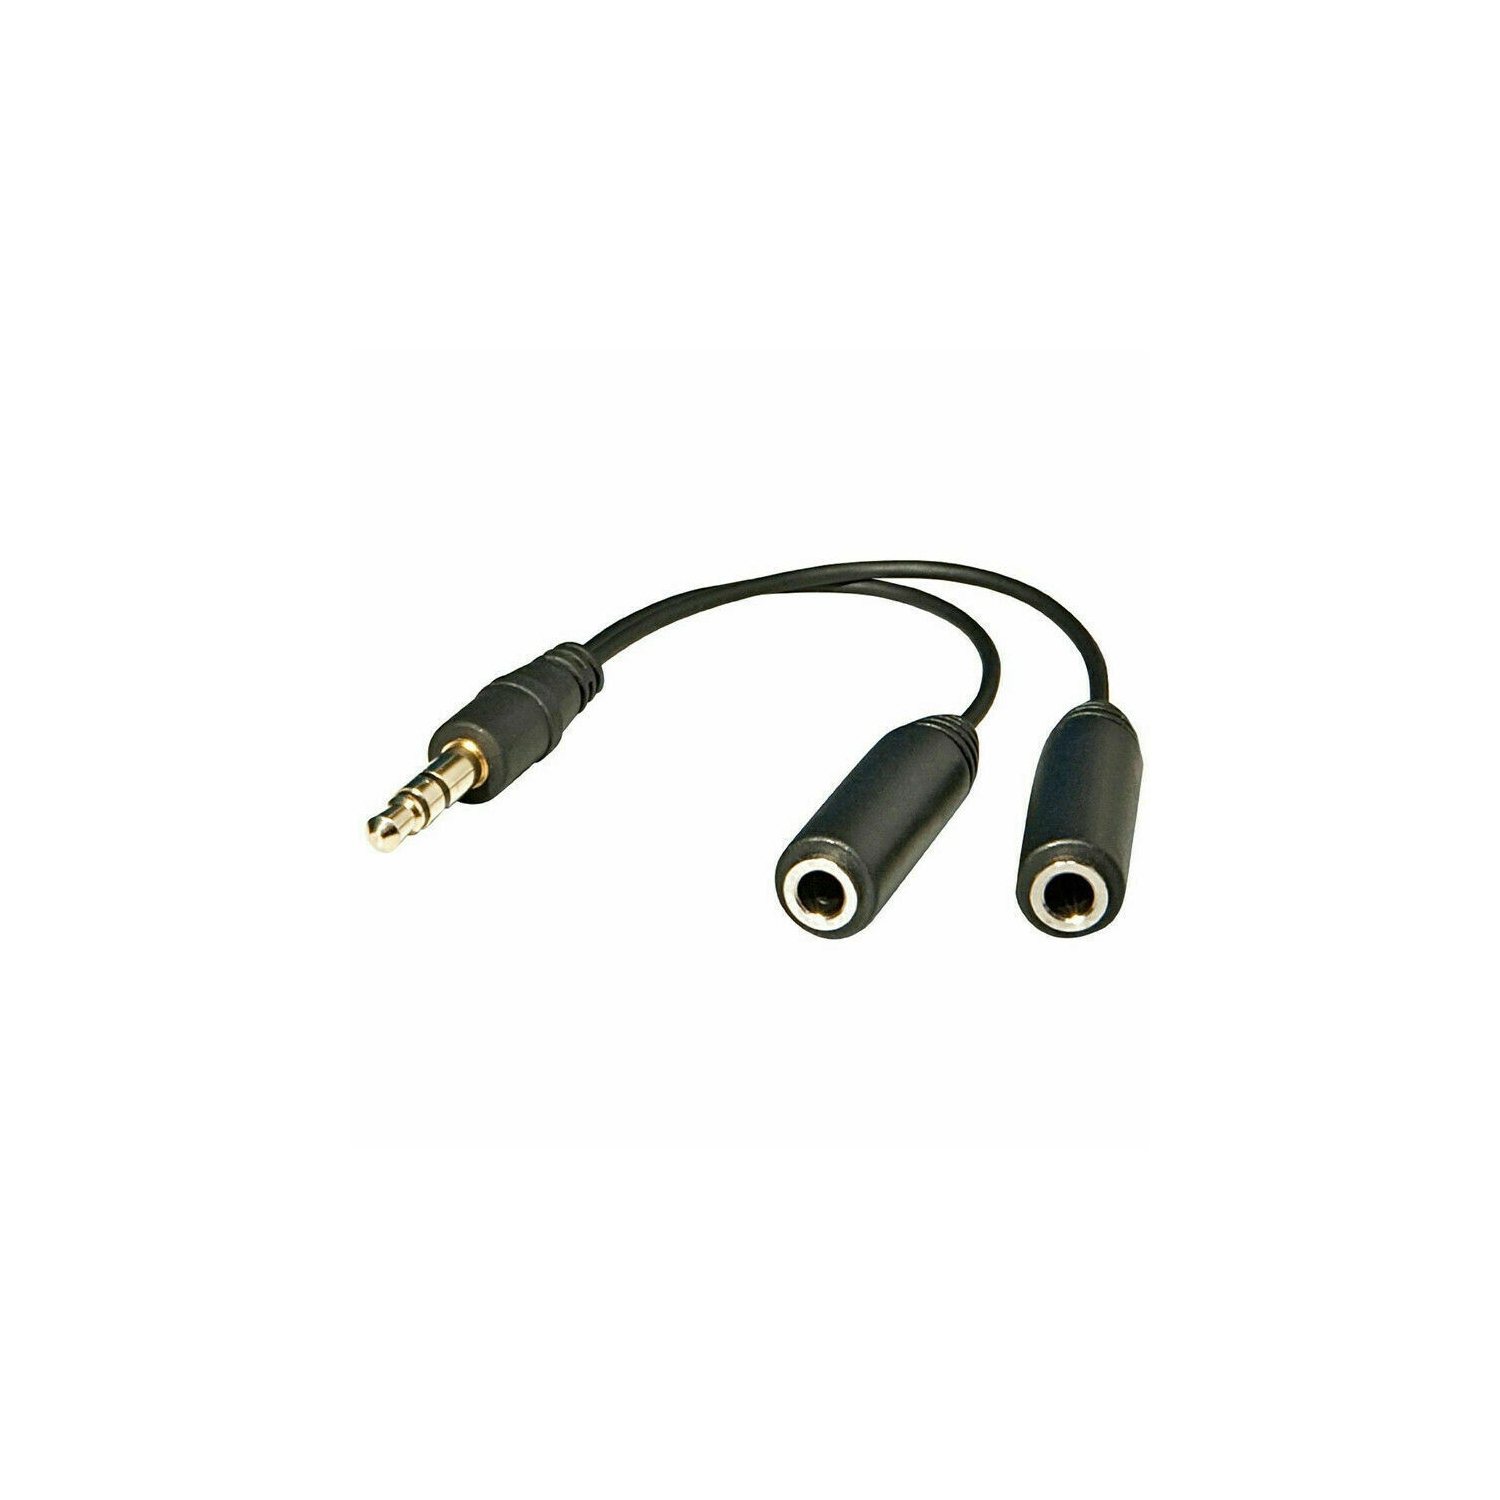 6" 1 Male to 2 Female Gold Plated 3.5mm Audio Y Splitter Headphone Cable Black